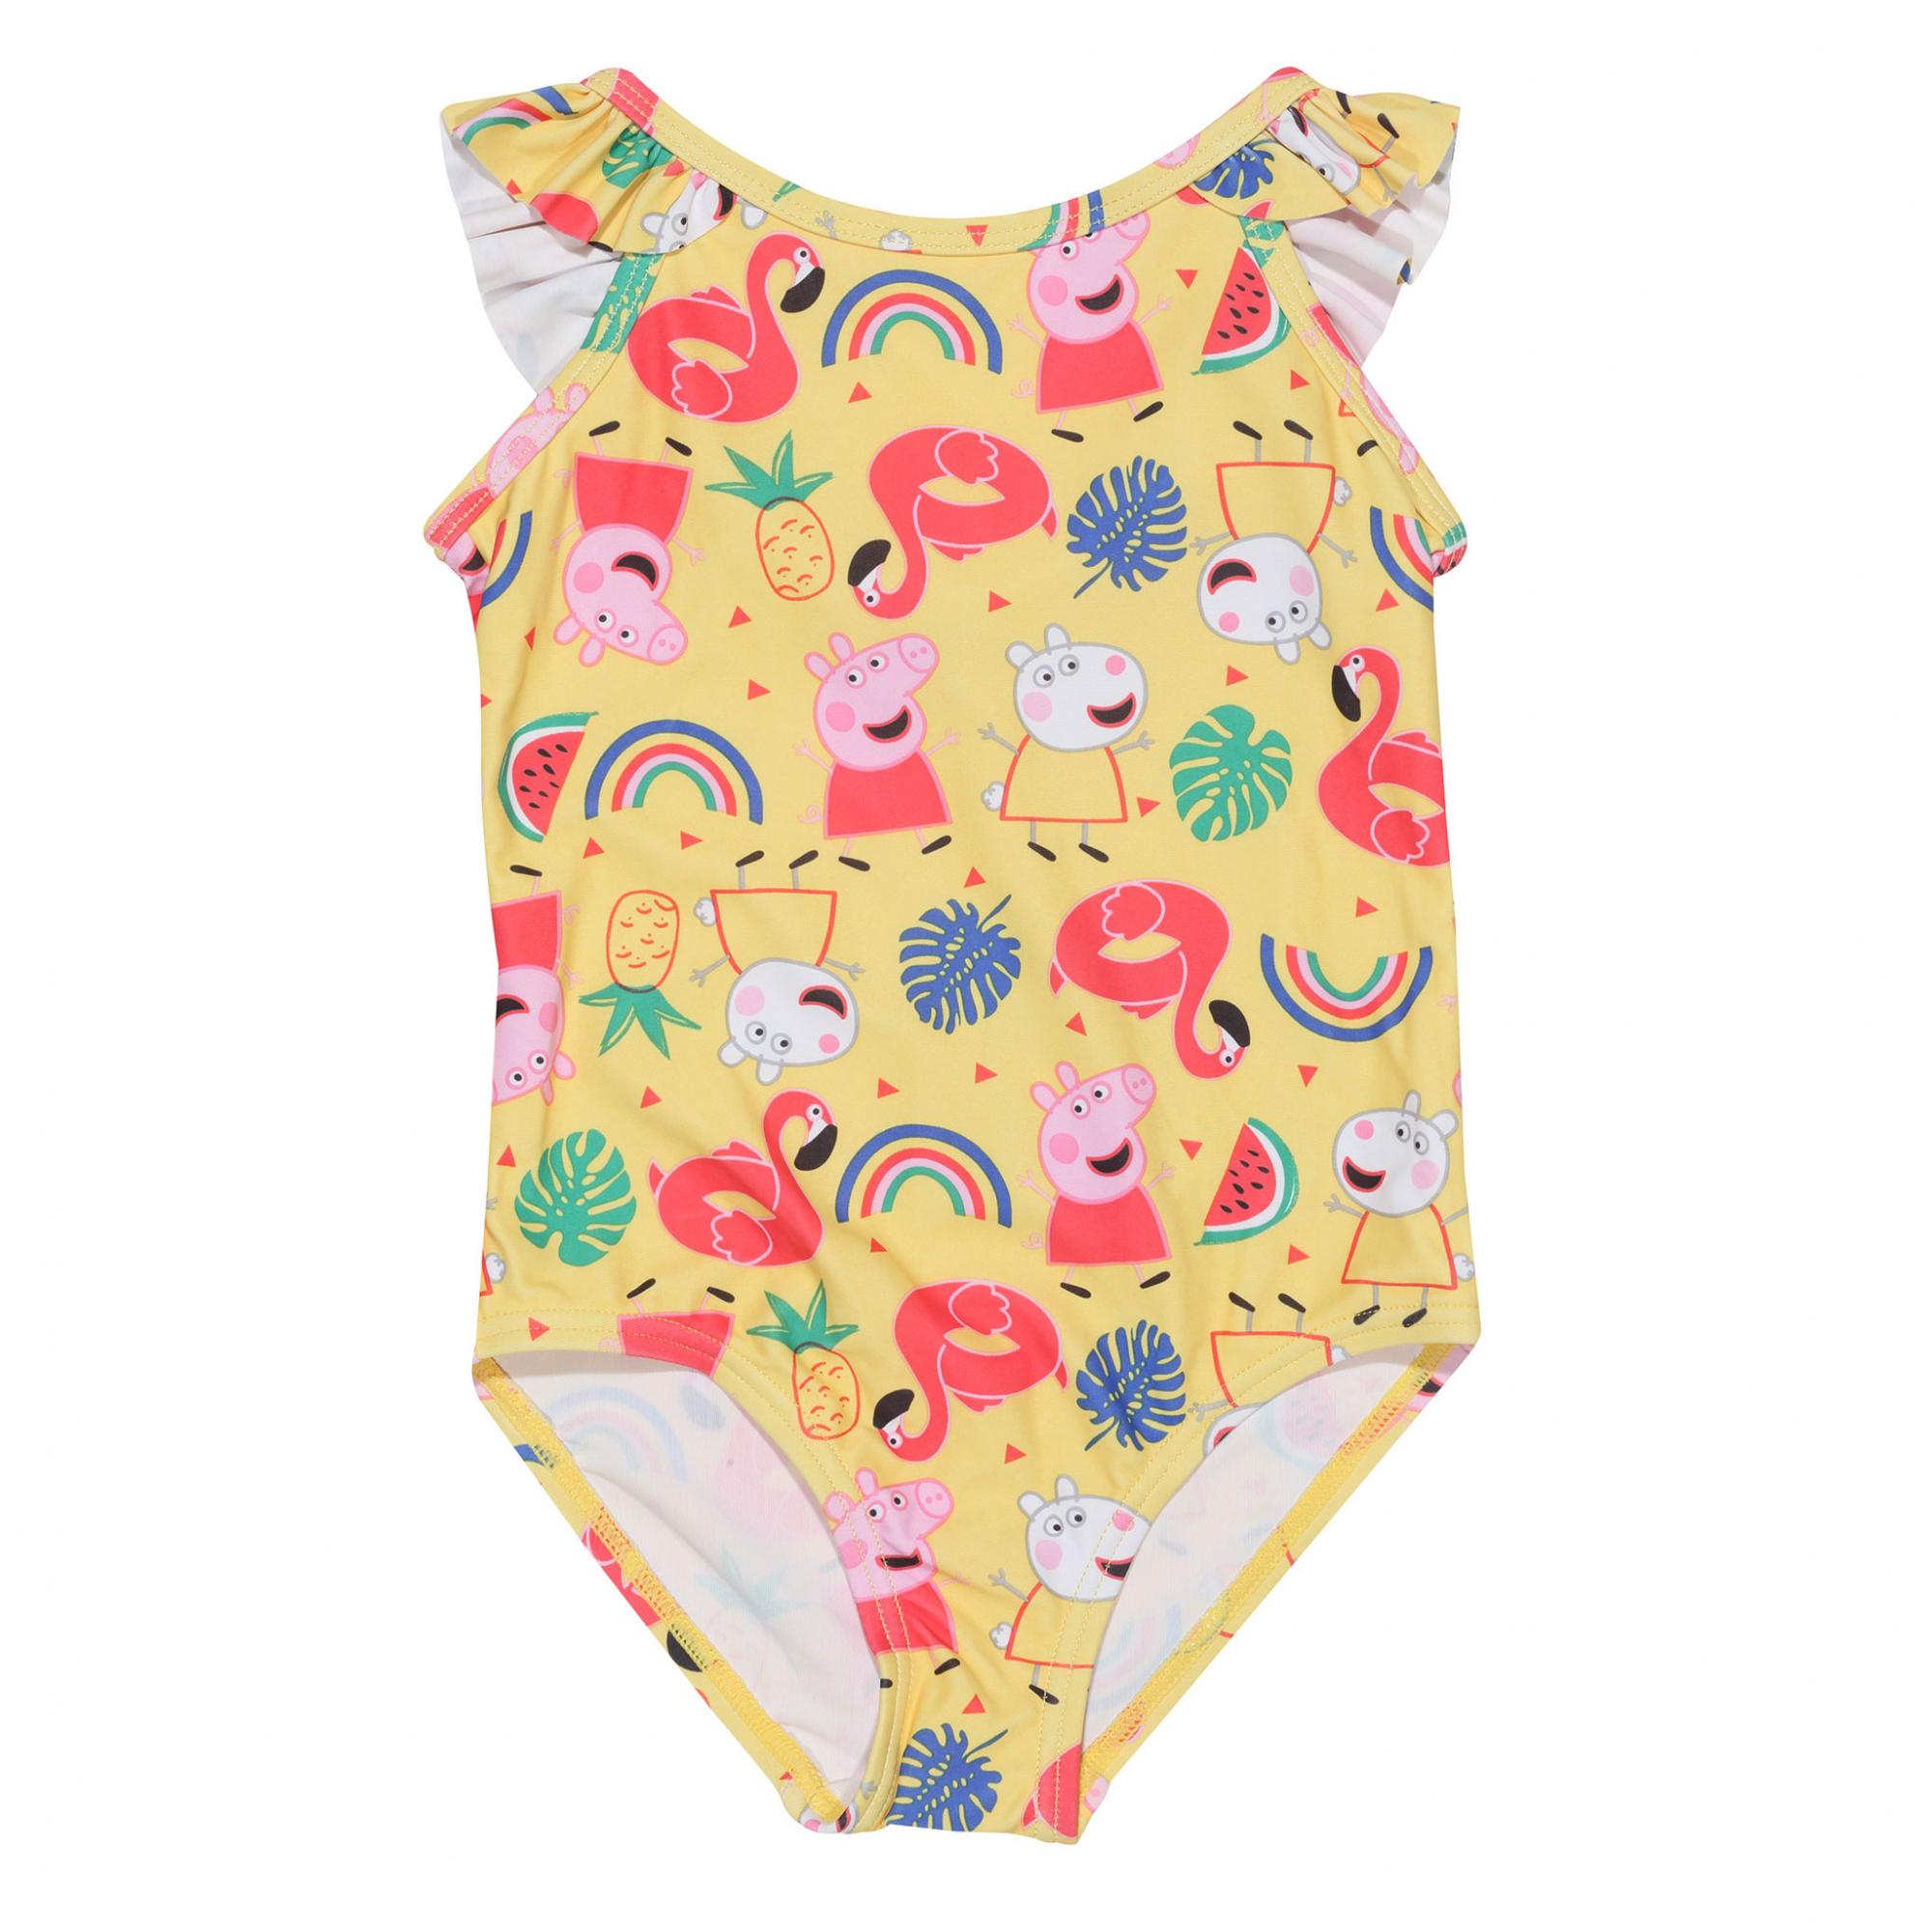 3T 4T or 5T  $30 Rainbow Swim Bathing Suit Toddler/'s Size 2T PEPPA PIG UPF-50